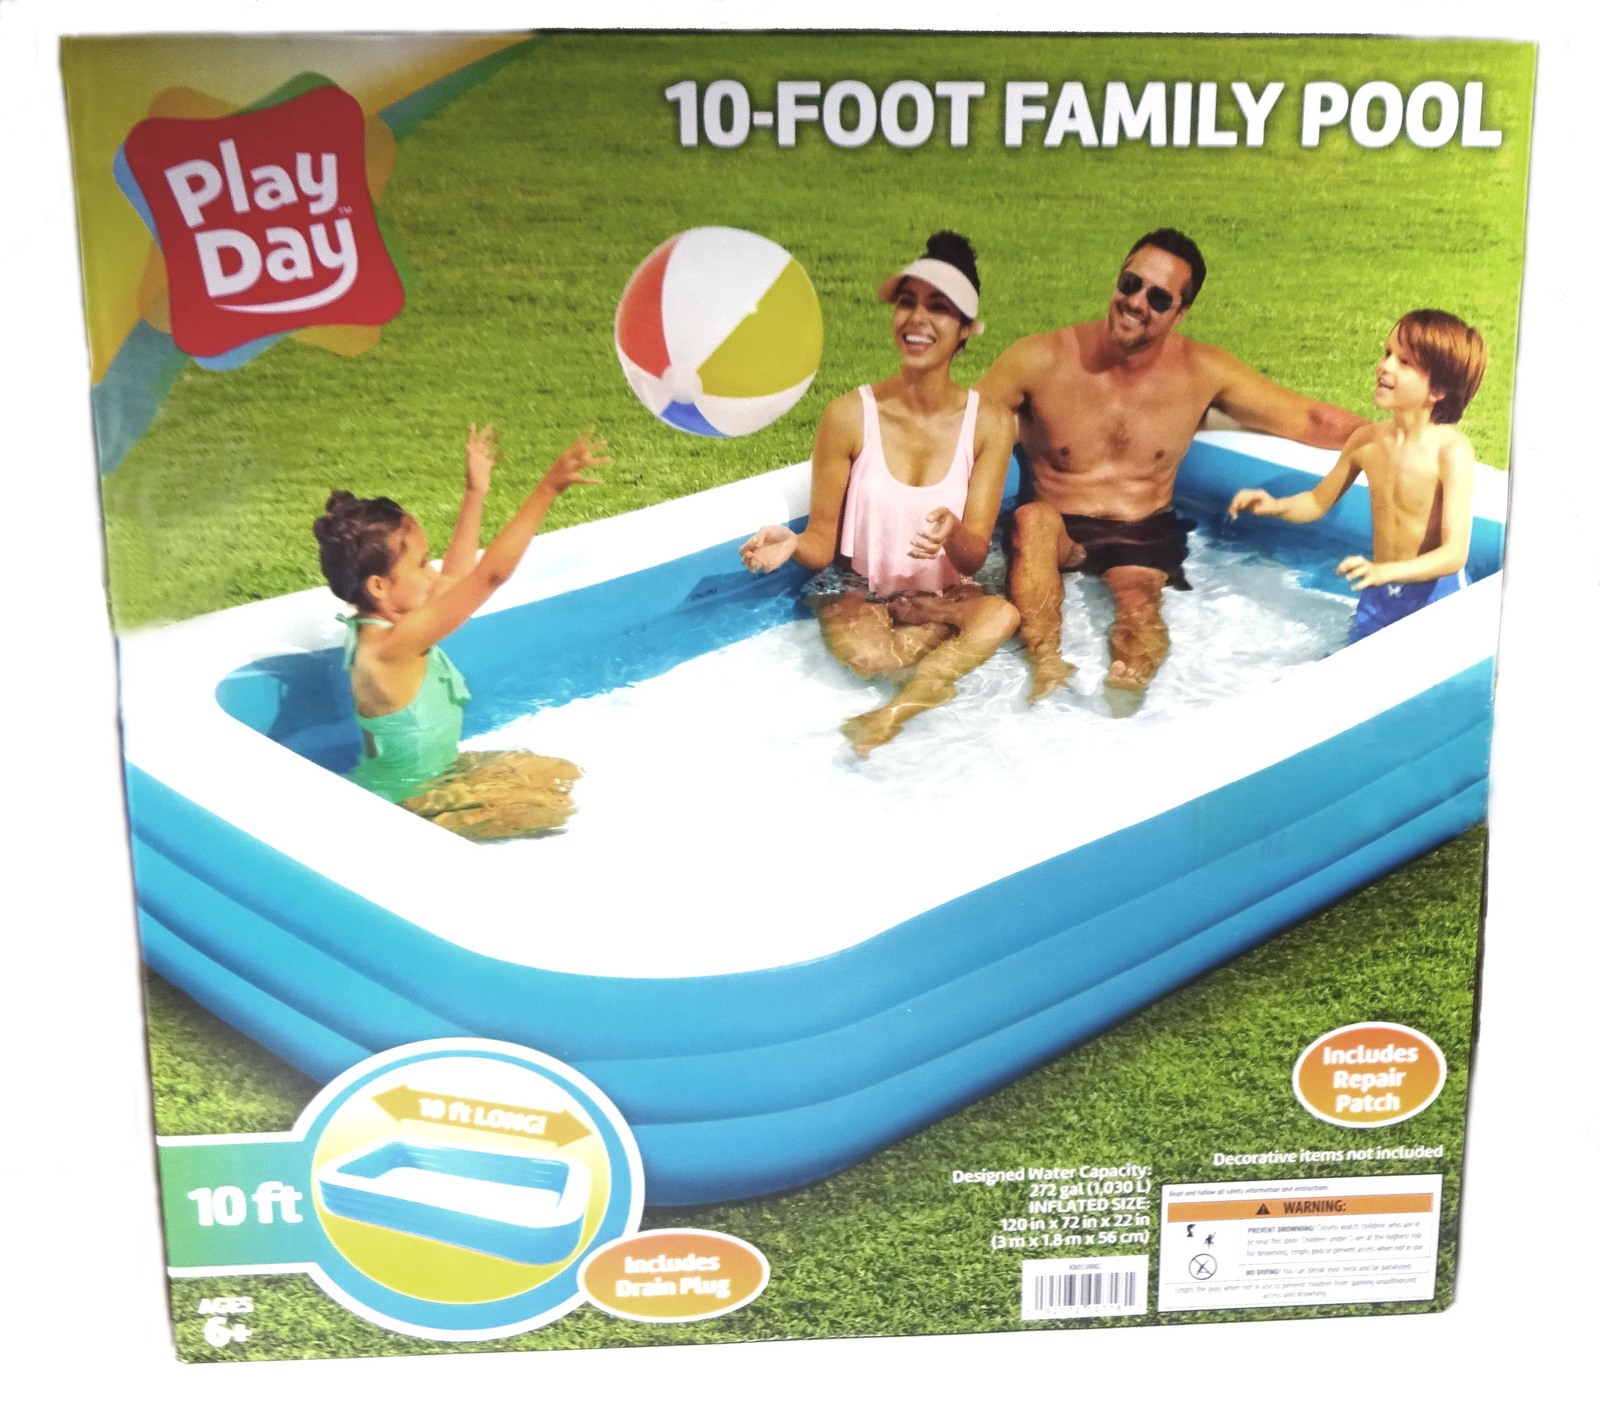 Play Day Inflatable Family Pool, 10 Foot - $79.99